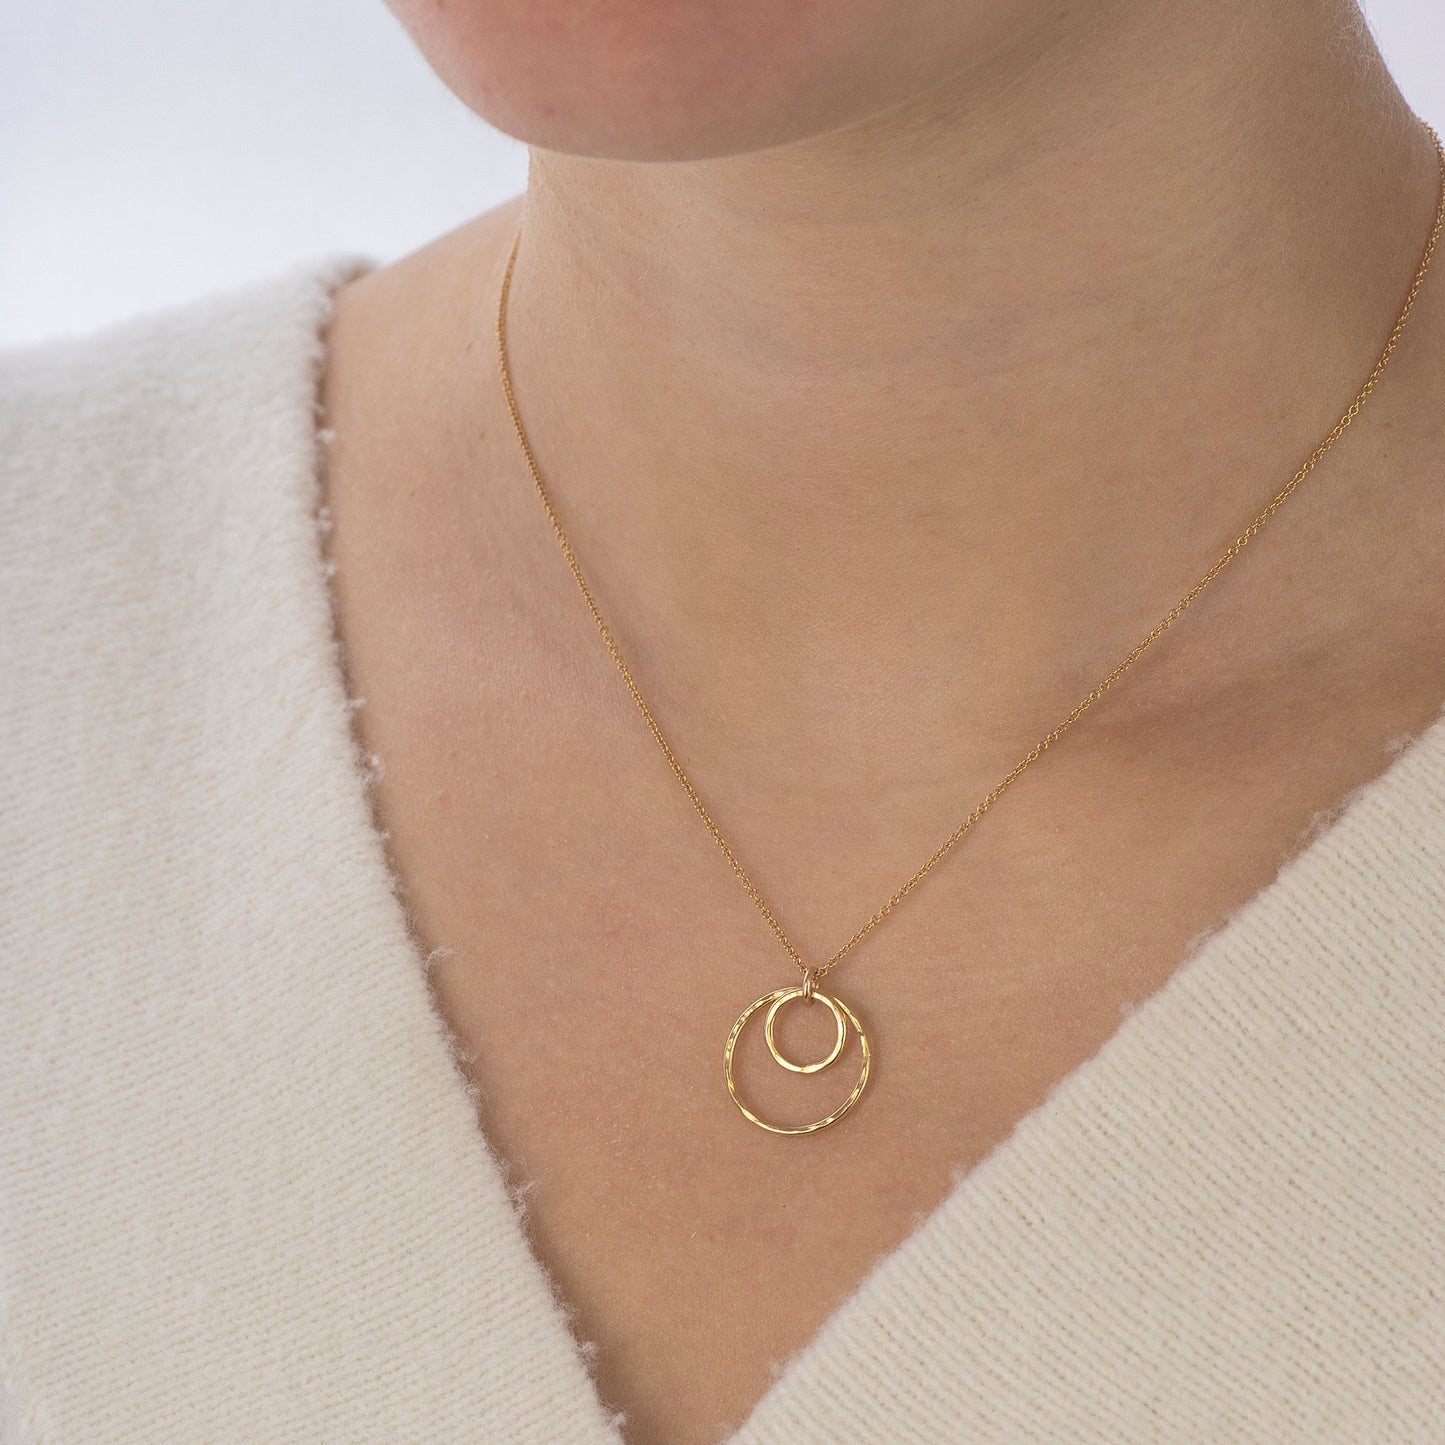 Gift for Bat Mitzvah - Forever Encircled with Love Necklace - Silver & Gold